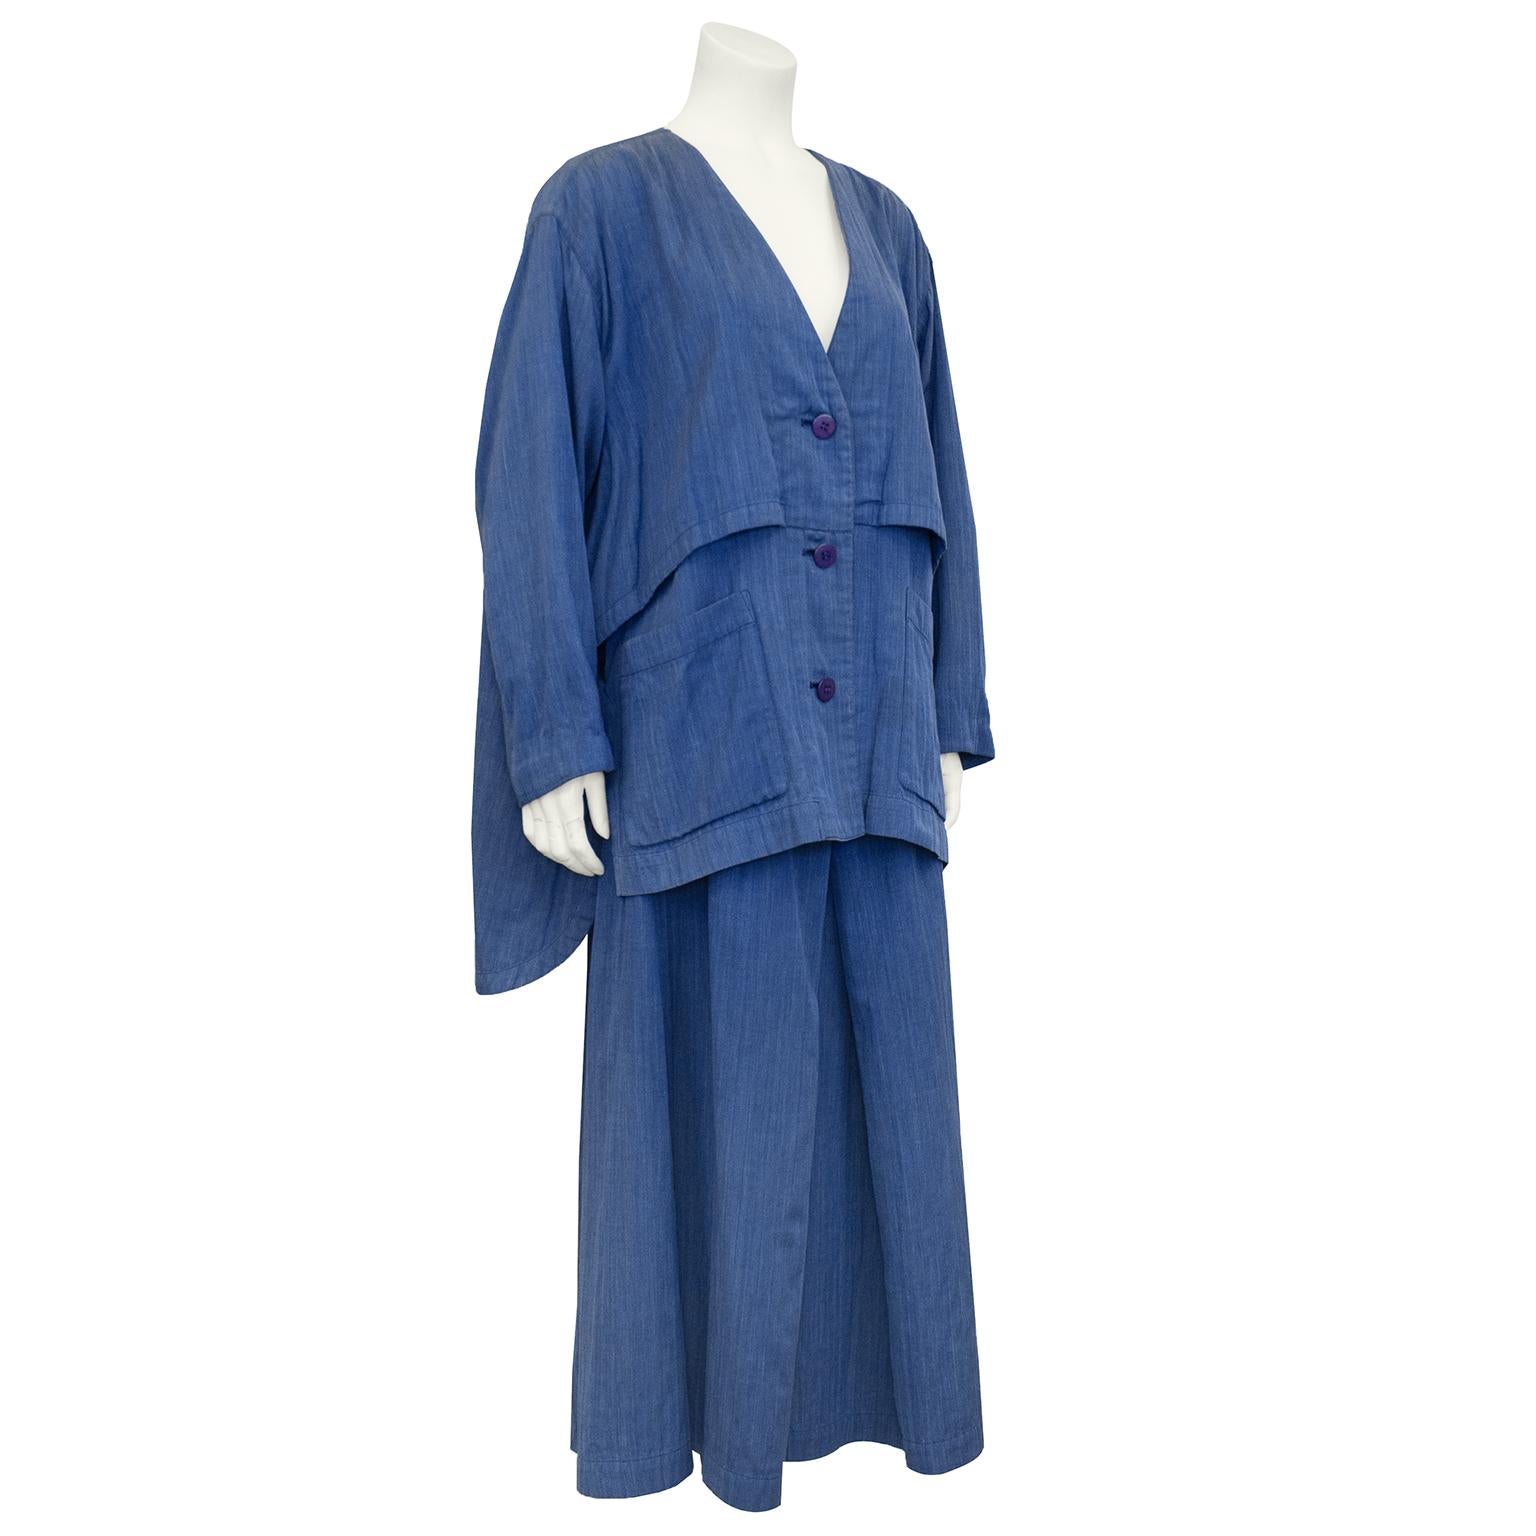 1990s Issey Miyake Permanente blue cotton that looks like a soft chambray denim oversized jacket and skirt ensemble. Jacket features a deep v neckline, large blue plastic buttons and large patch pockets. Jacket is A-line shape and longer in the